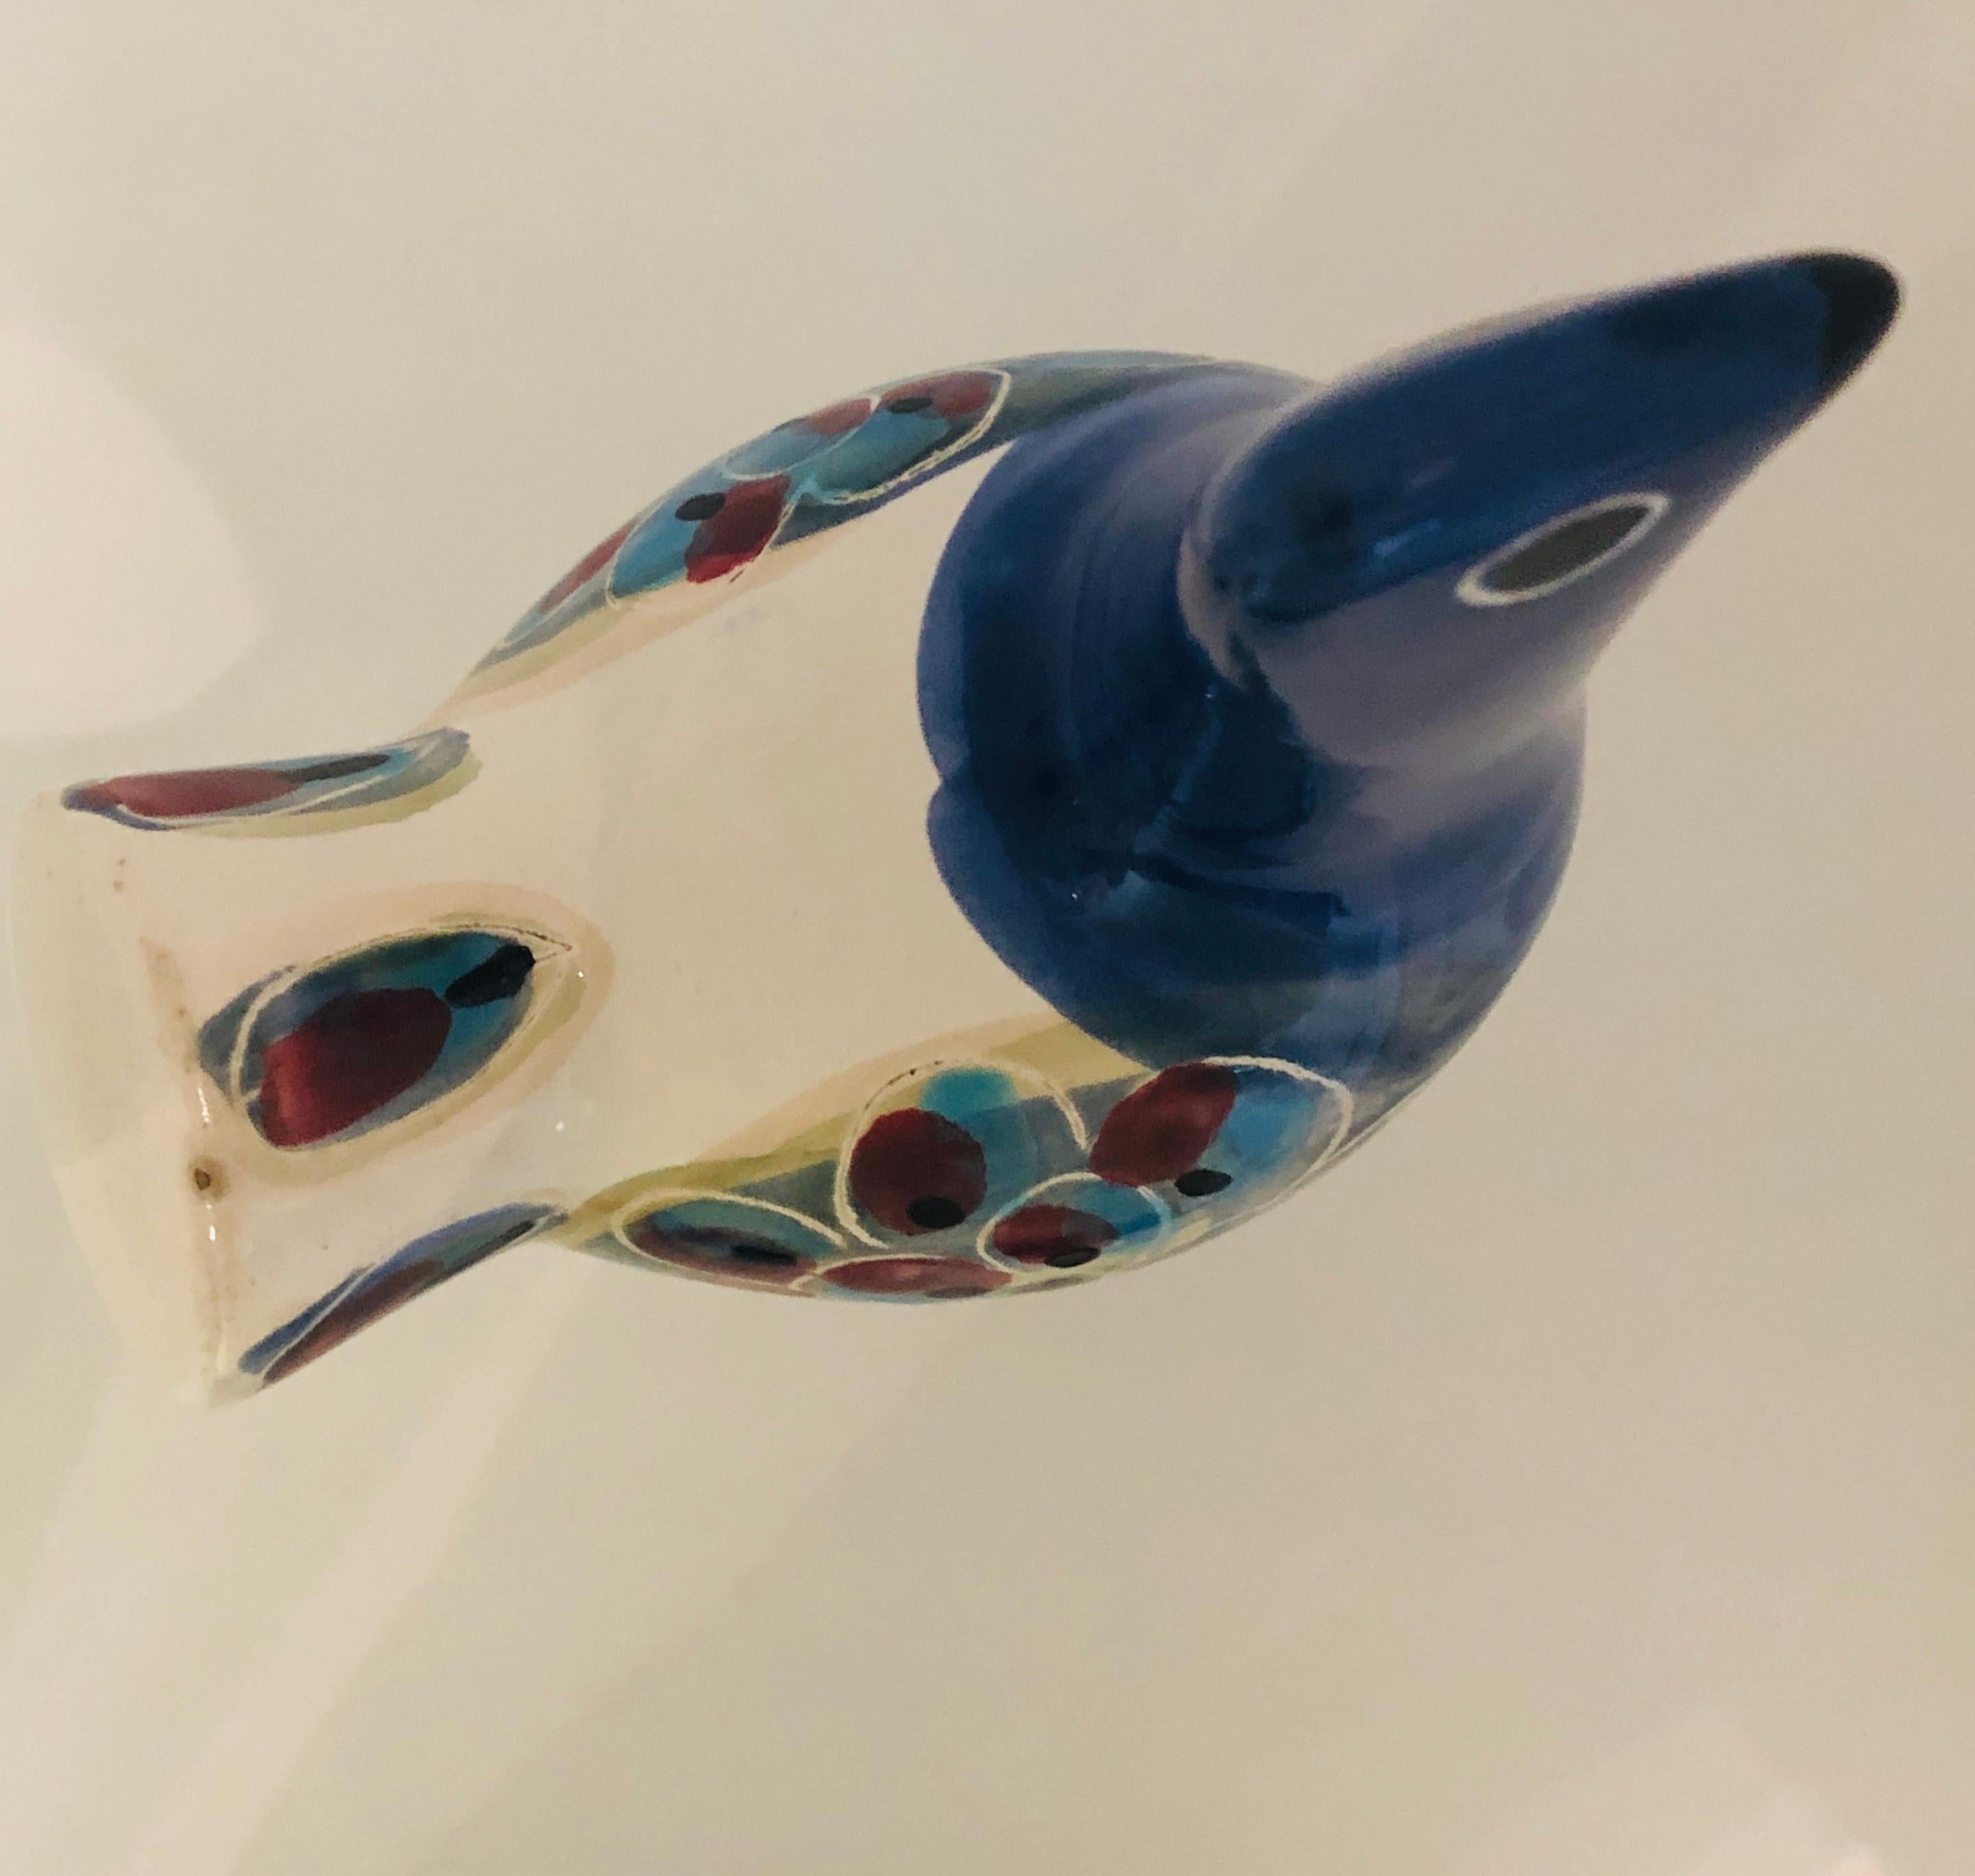 Blue, Ivory, Red and Black Abstract Zoomorphic Glazed Ceramic Bird Sculpture 12